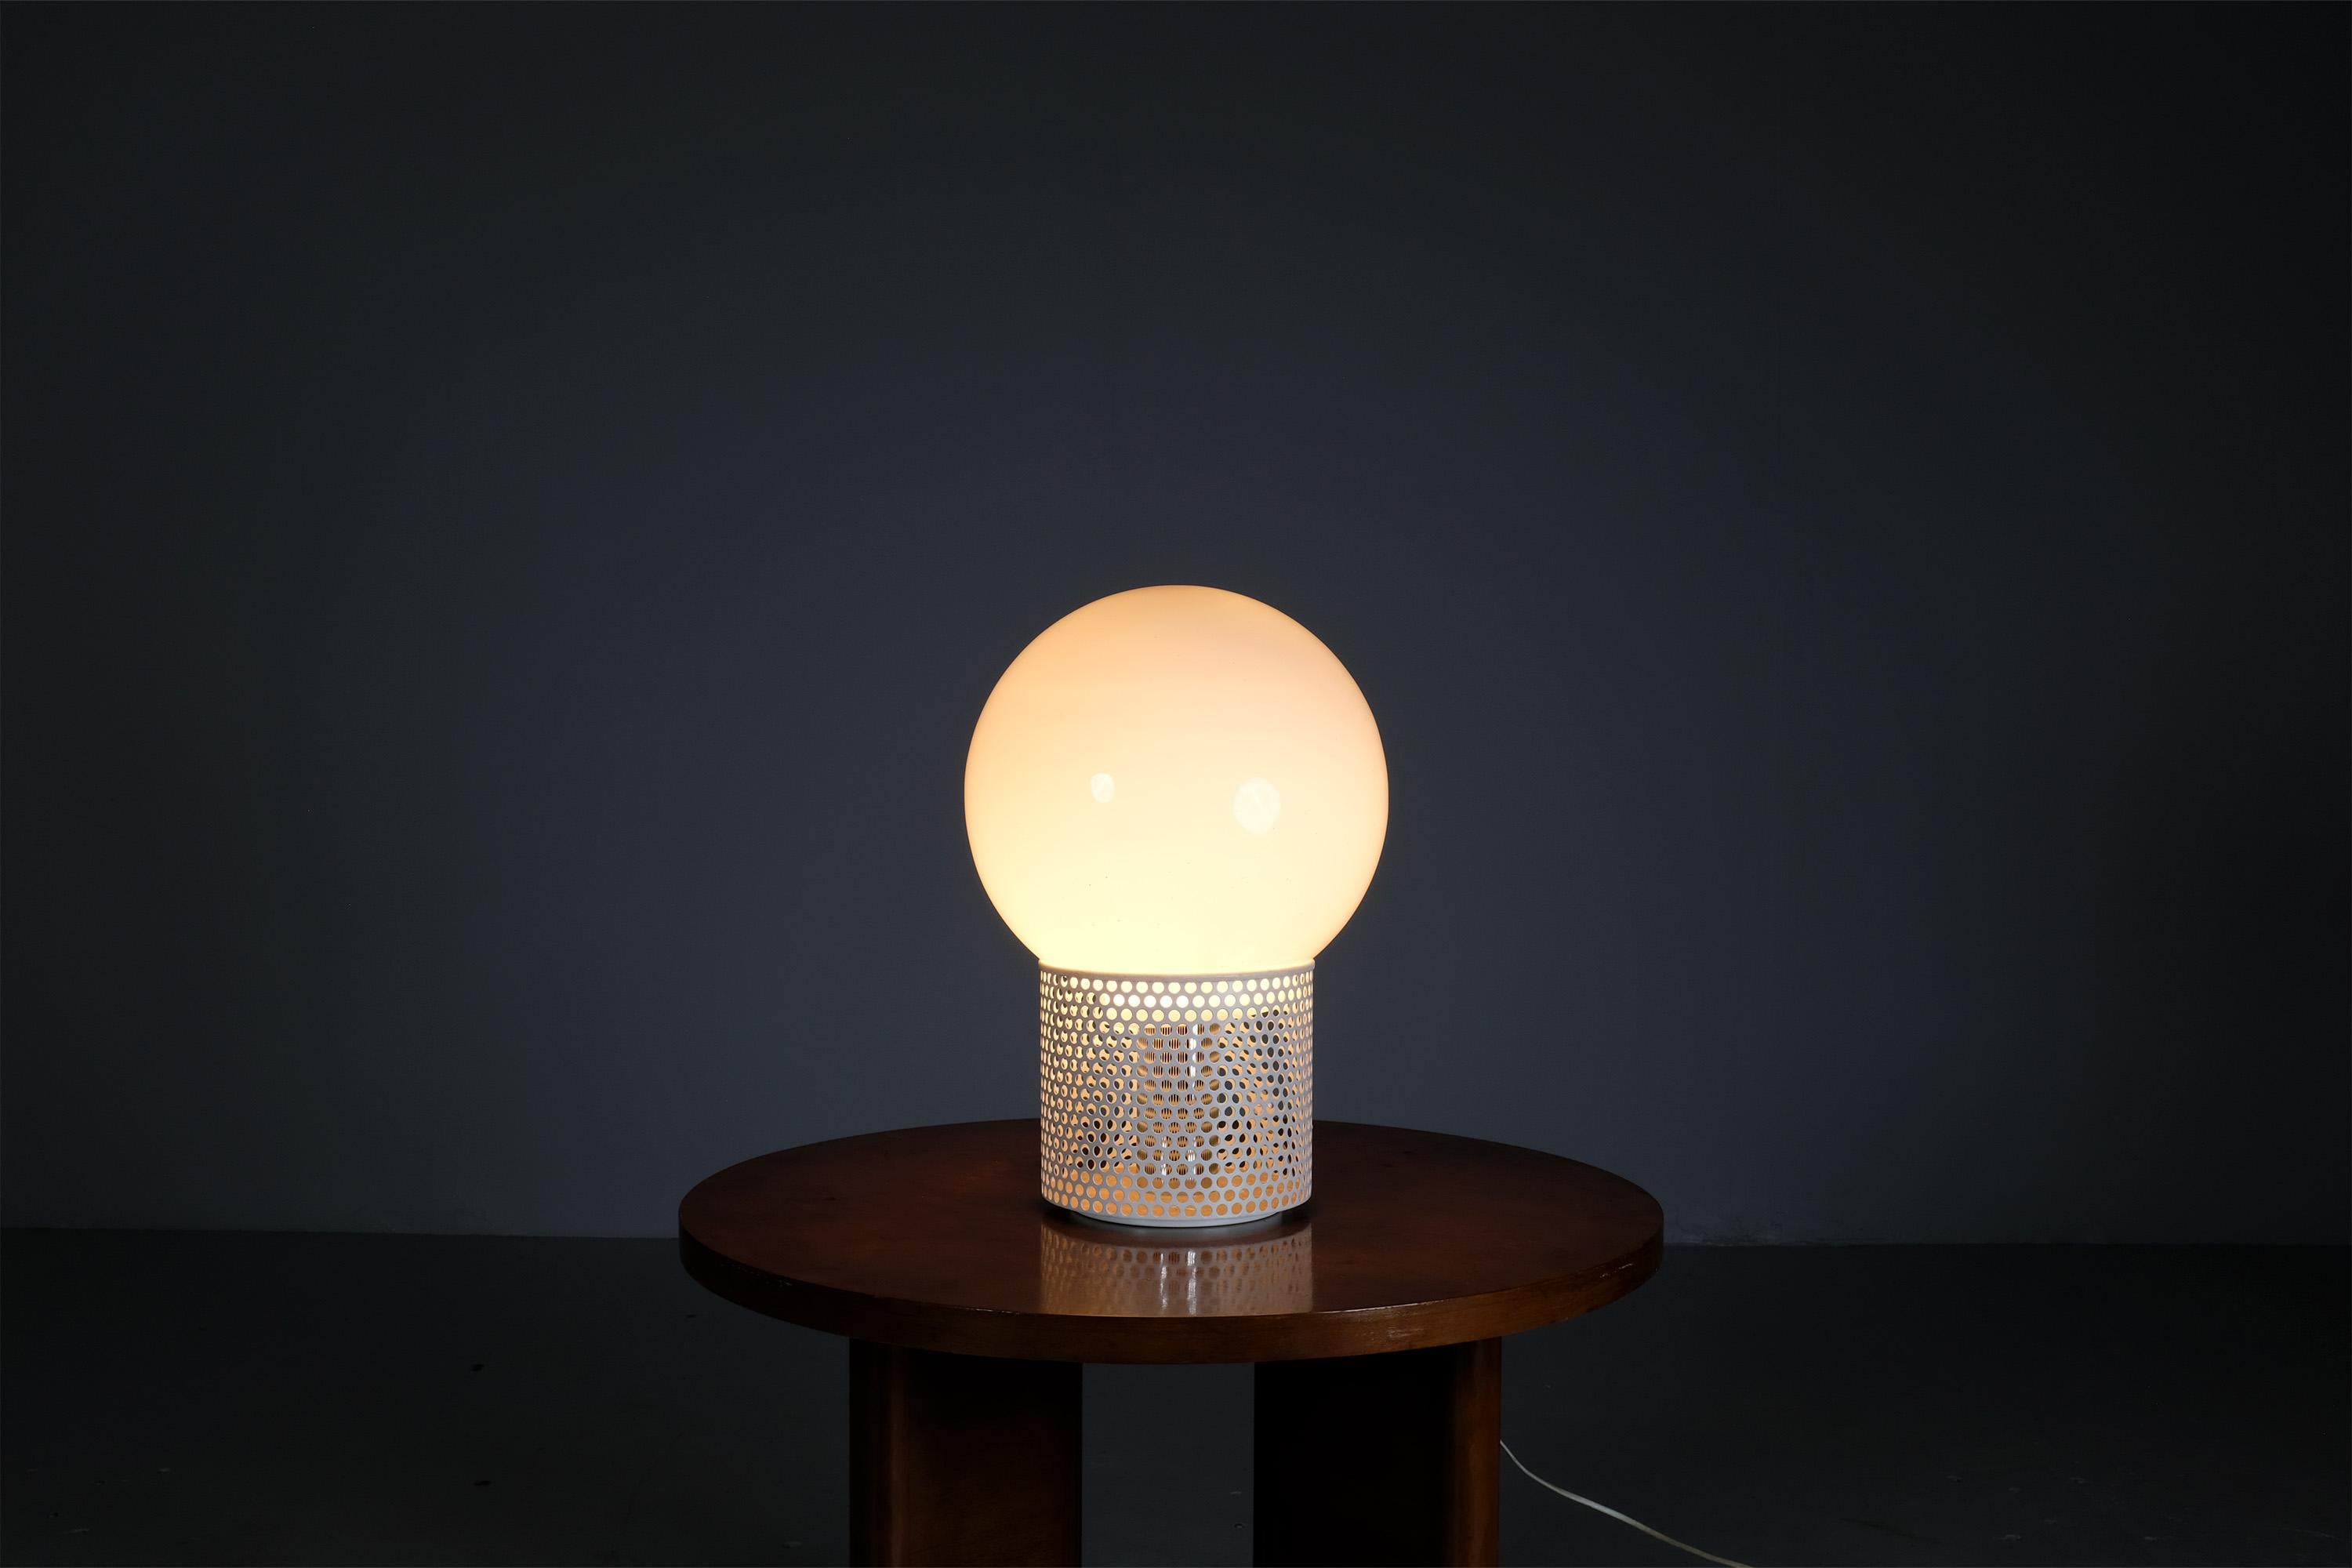 The model 10524 lamp was conceived for Verre Lumiere in the 1970s with a captivating style and classic materials of its time.

This versatile minimalist piece has a white opal glass spherical diffuser that illuminates spaces in all directions.